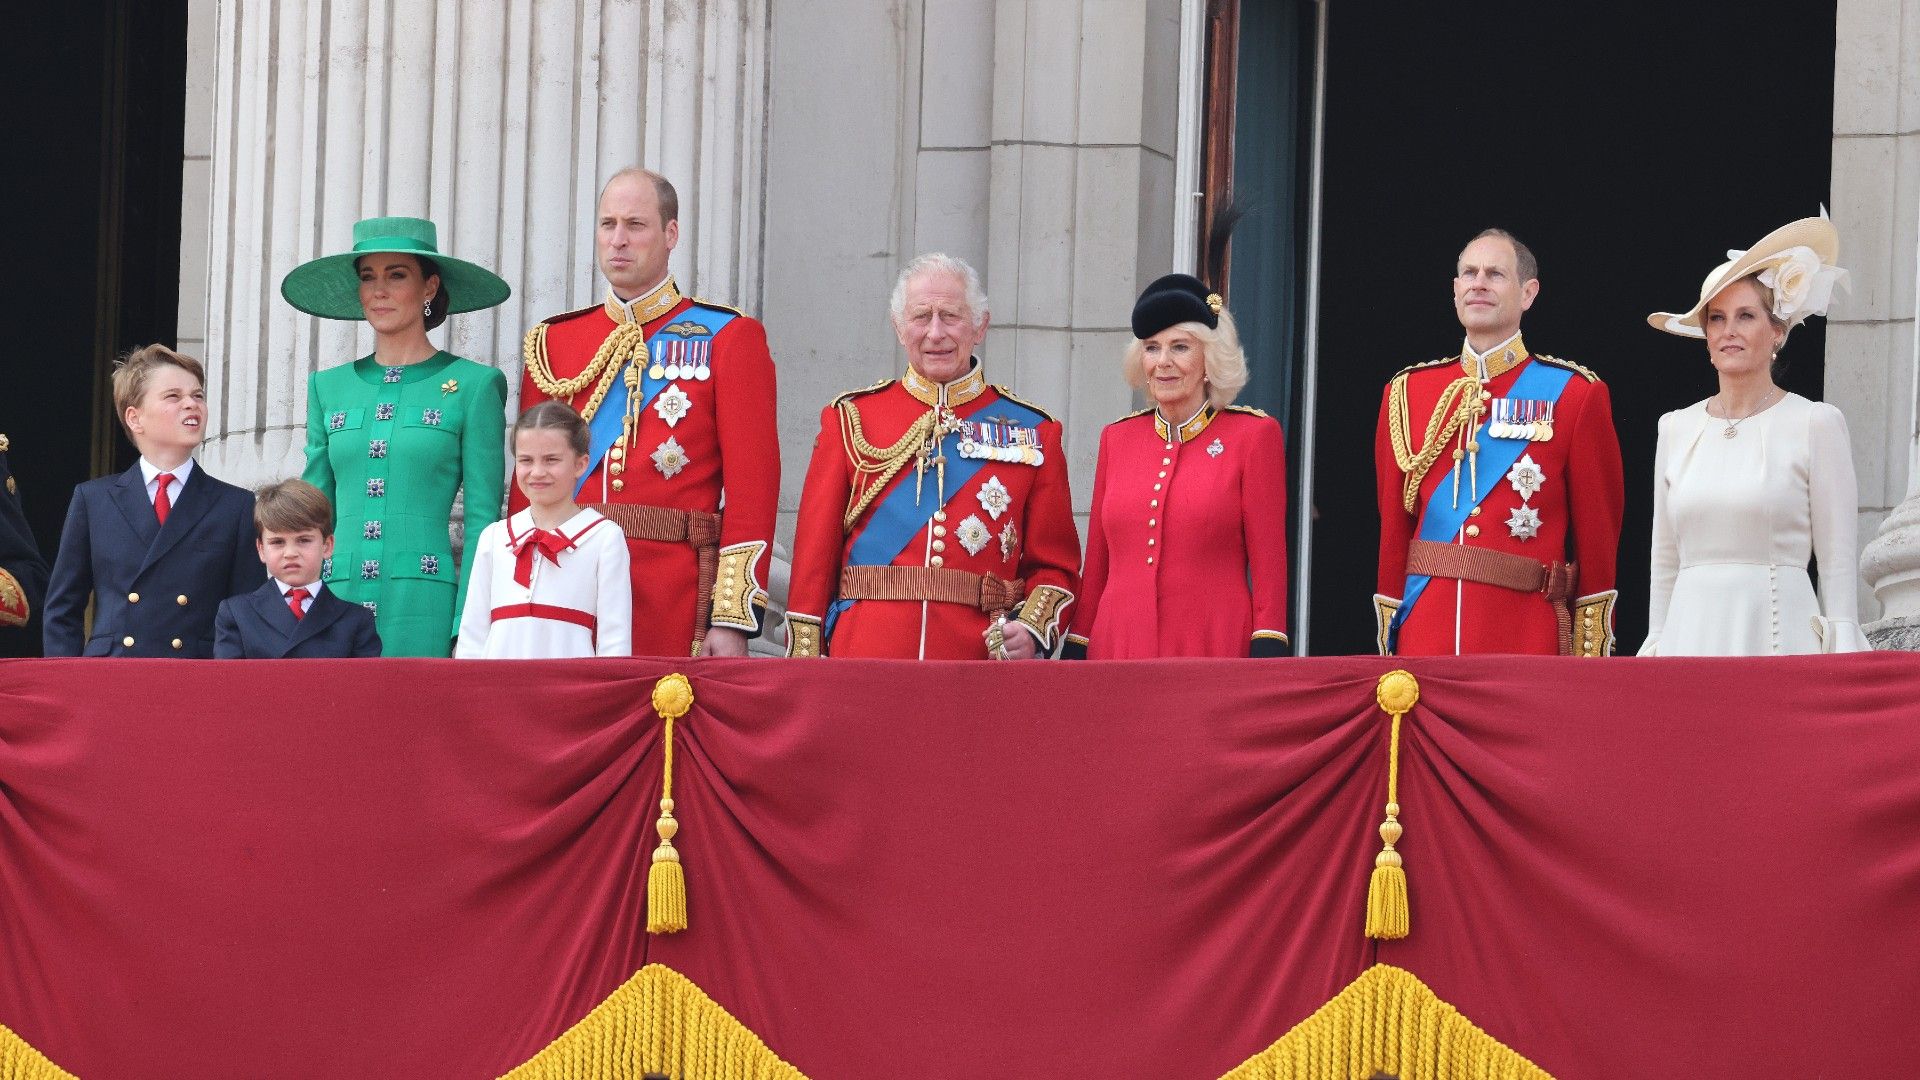 <p>                     It is tradition for almost every member of the royal family to attend the all-important Trooping the Colour ceremony in June every year, which is an event that marks the monarch’s official birthday.                    </p>                                      <p>                     It's a fairly extensive, celebratory affair – there’s plenty of pomp and ceremony in the form of a royal salute from the troops, an inspection of the military by the monarch, and a parade around London before the royal family all gather on the balcony of Buckingham Palace to watch the Royal Air Force fly-past from above. In fact, this is a royal tradition that dates back 260 years, and is still religiously adhered to, to this day.                   </p>